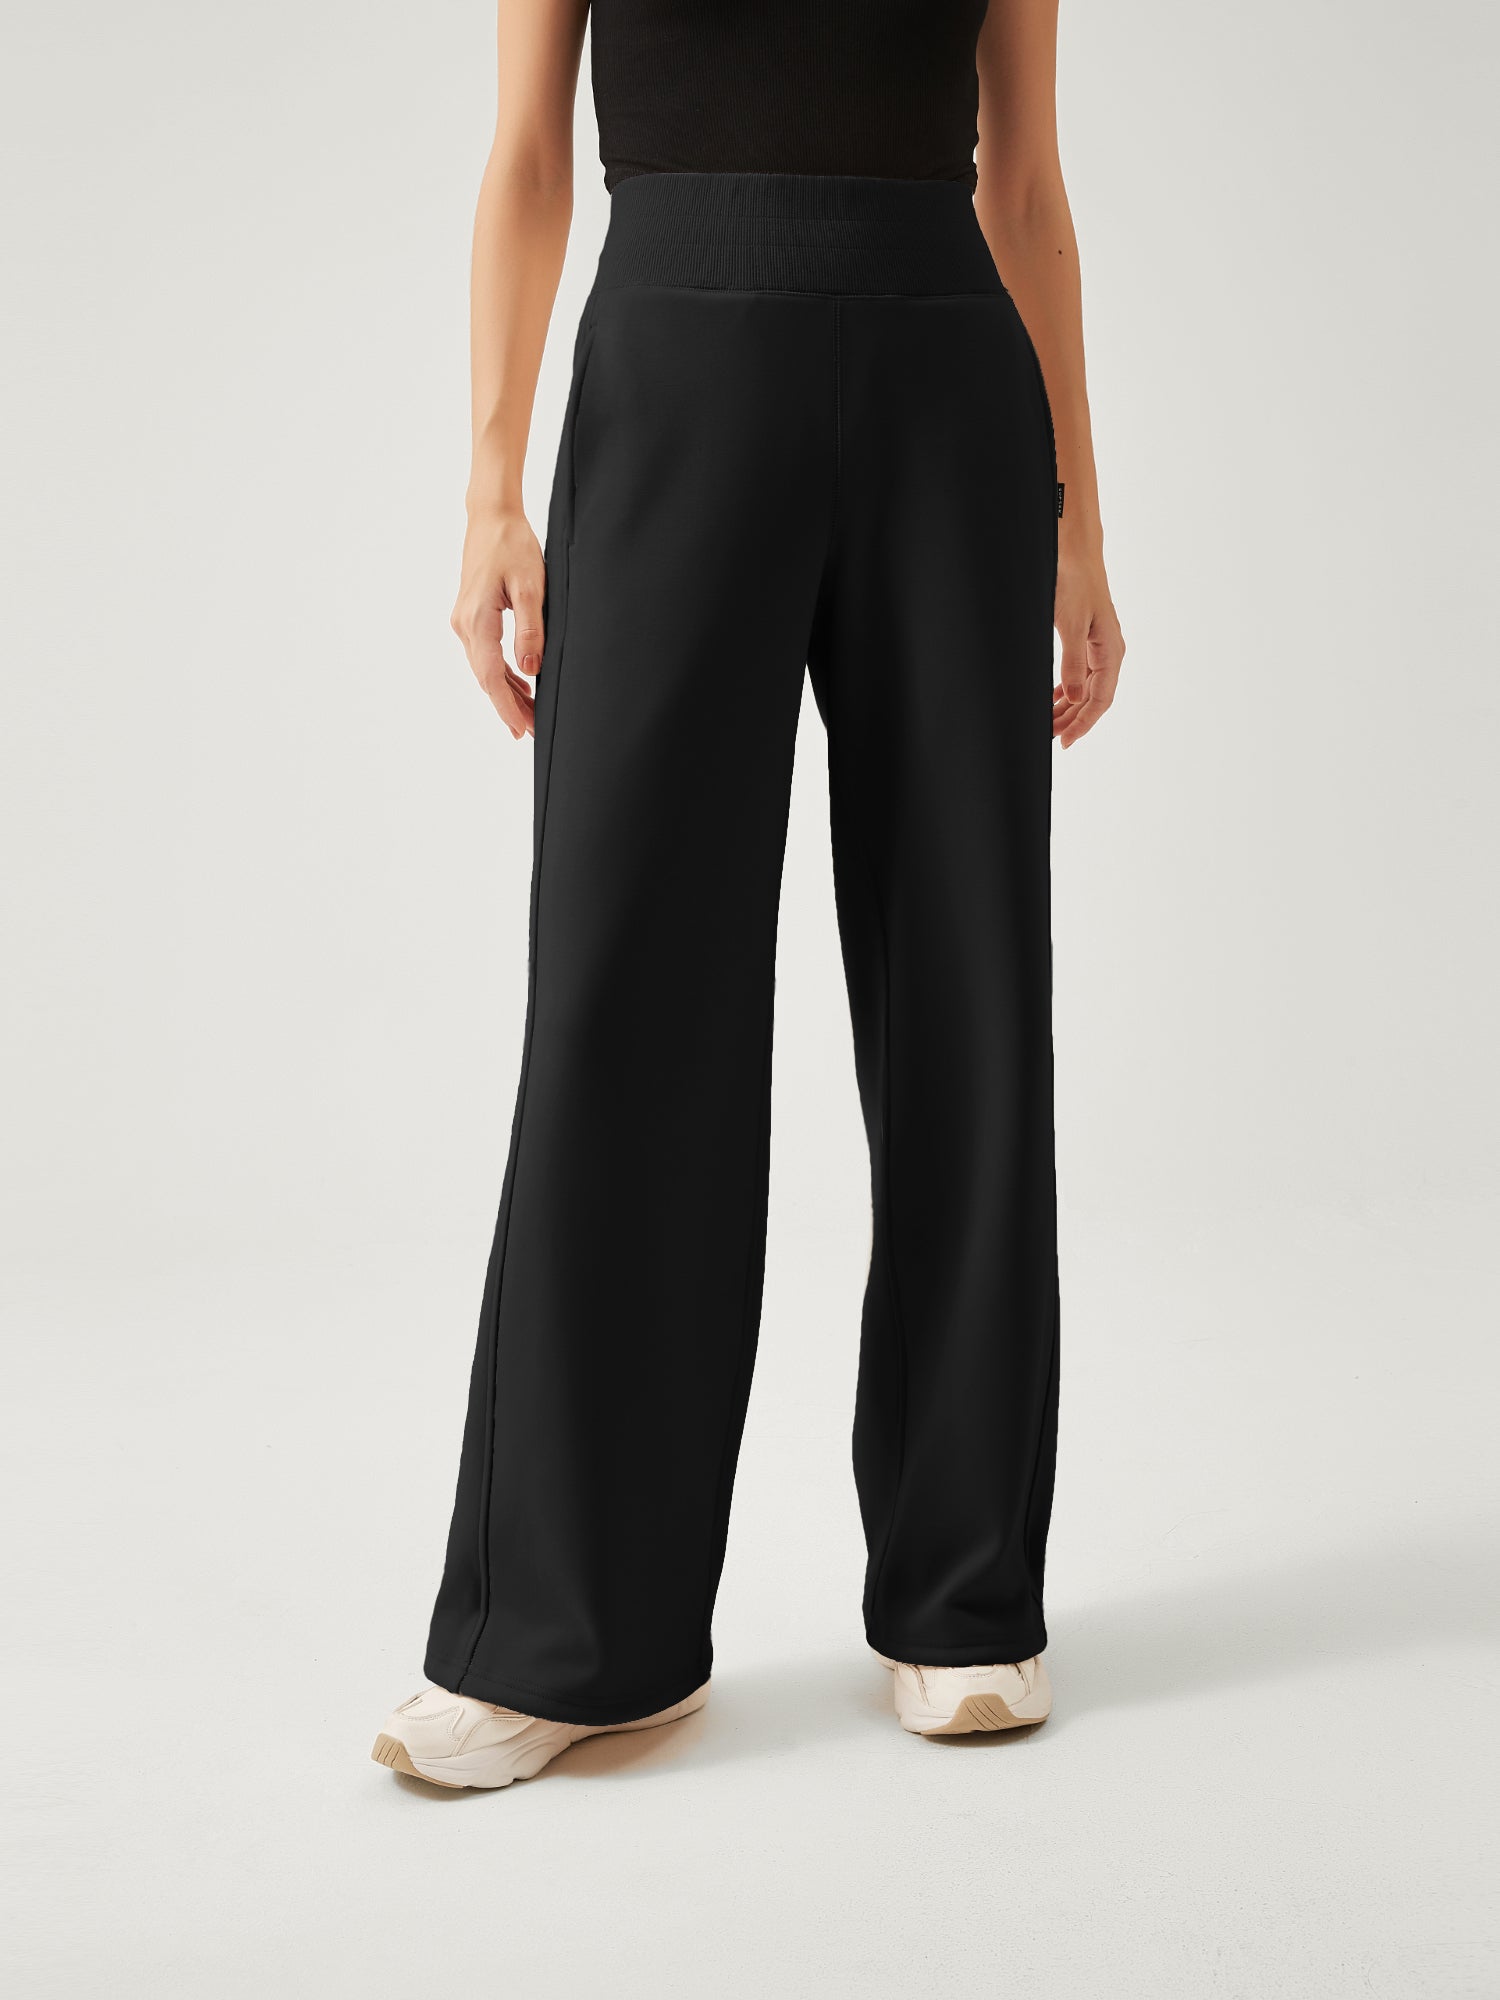 Cubby Sweatpants, Flared, High-Waisted Trendy Sweatpants